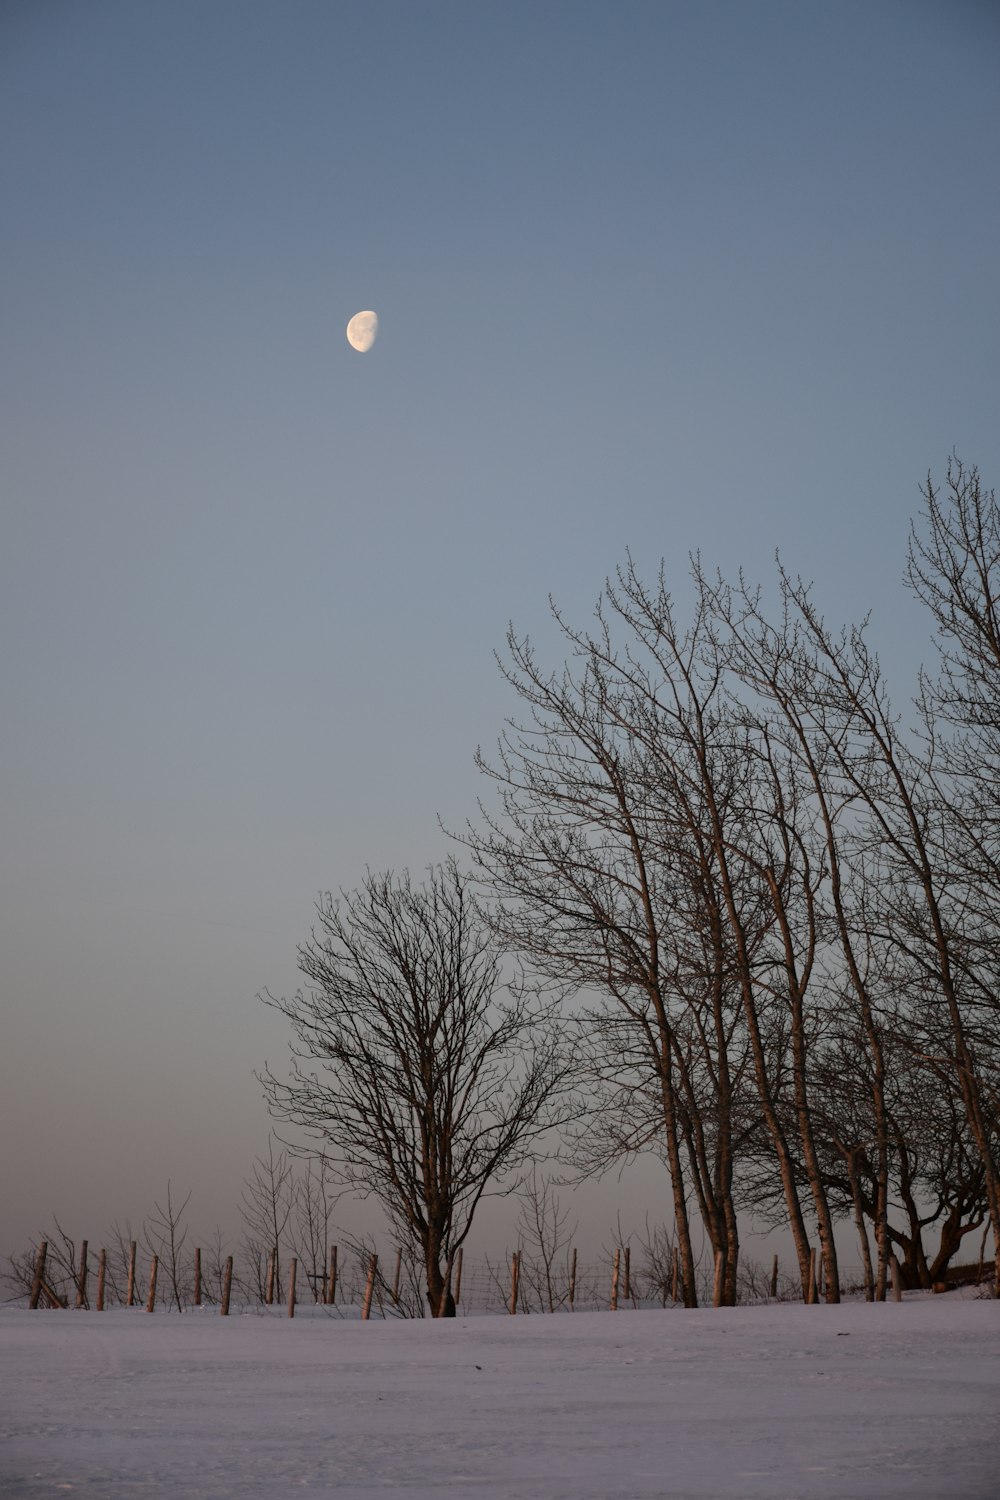 a full moon rises over a snowy landscape